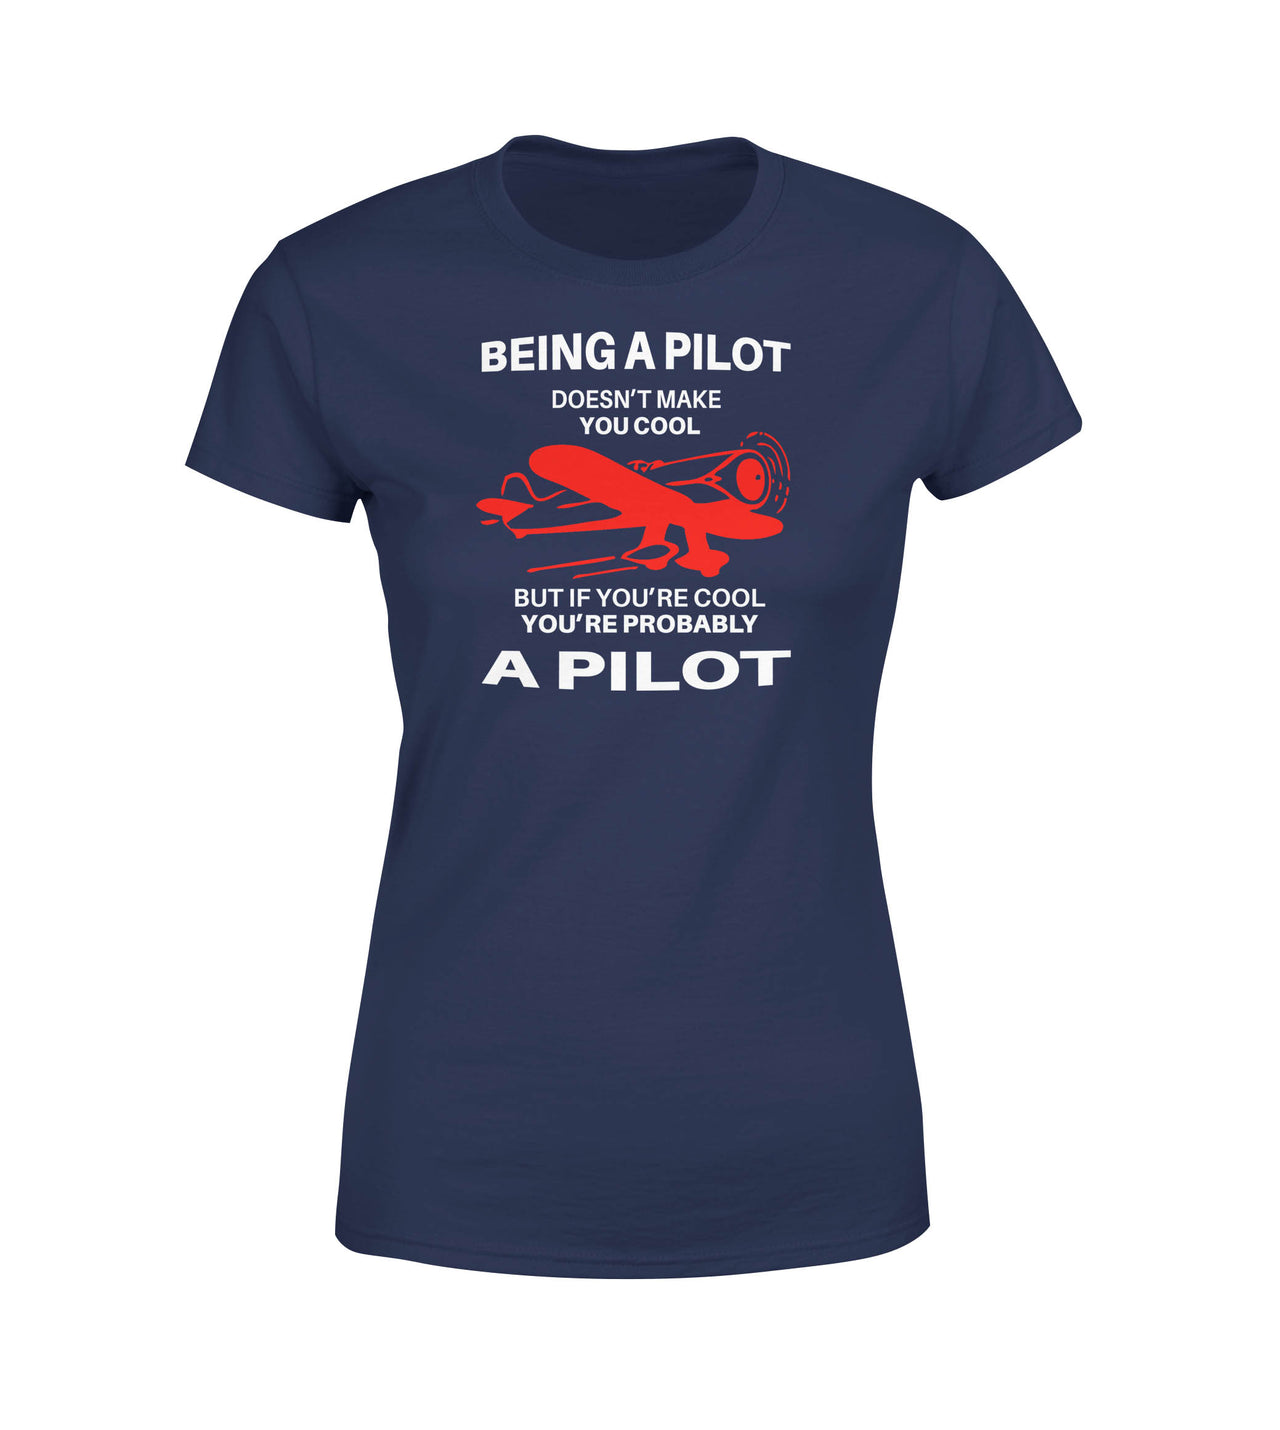 If You're Cool You're Probably a Pilot Designed Women T-Shirts